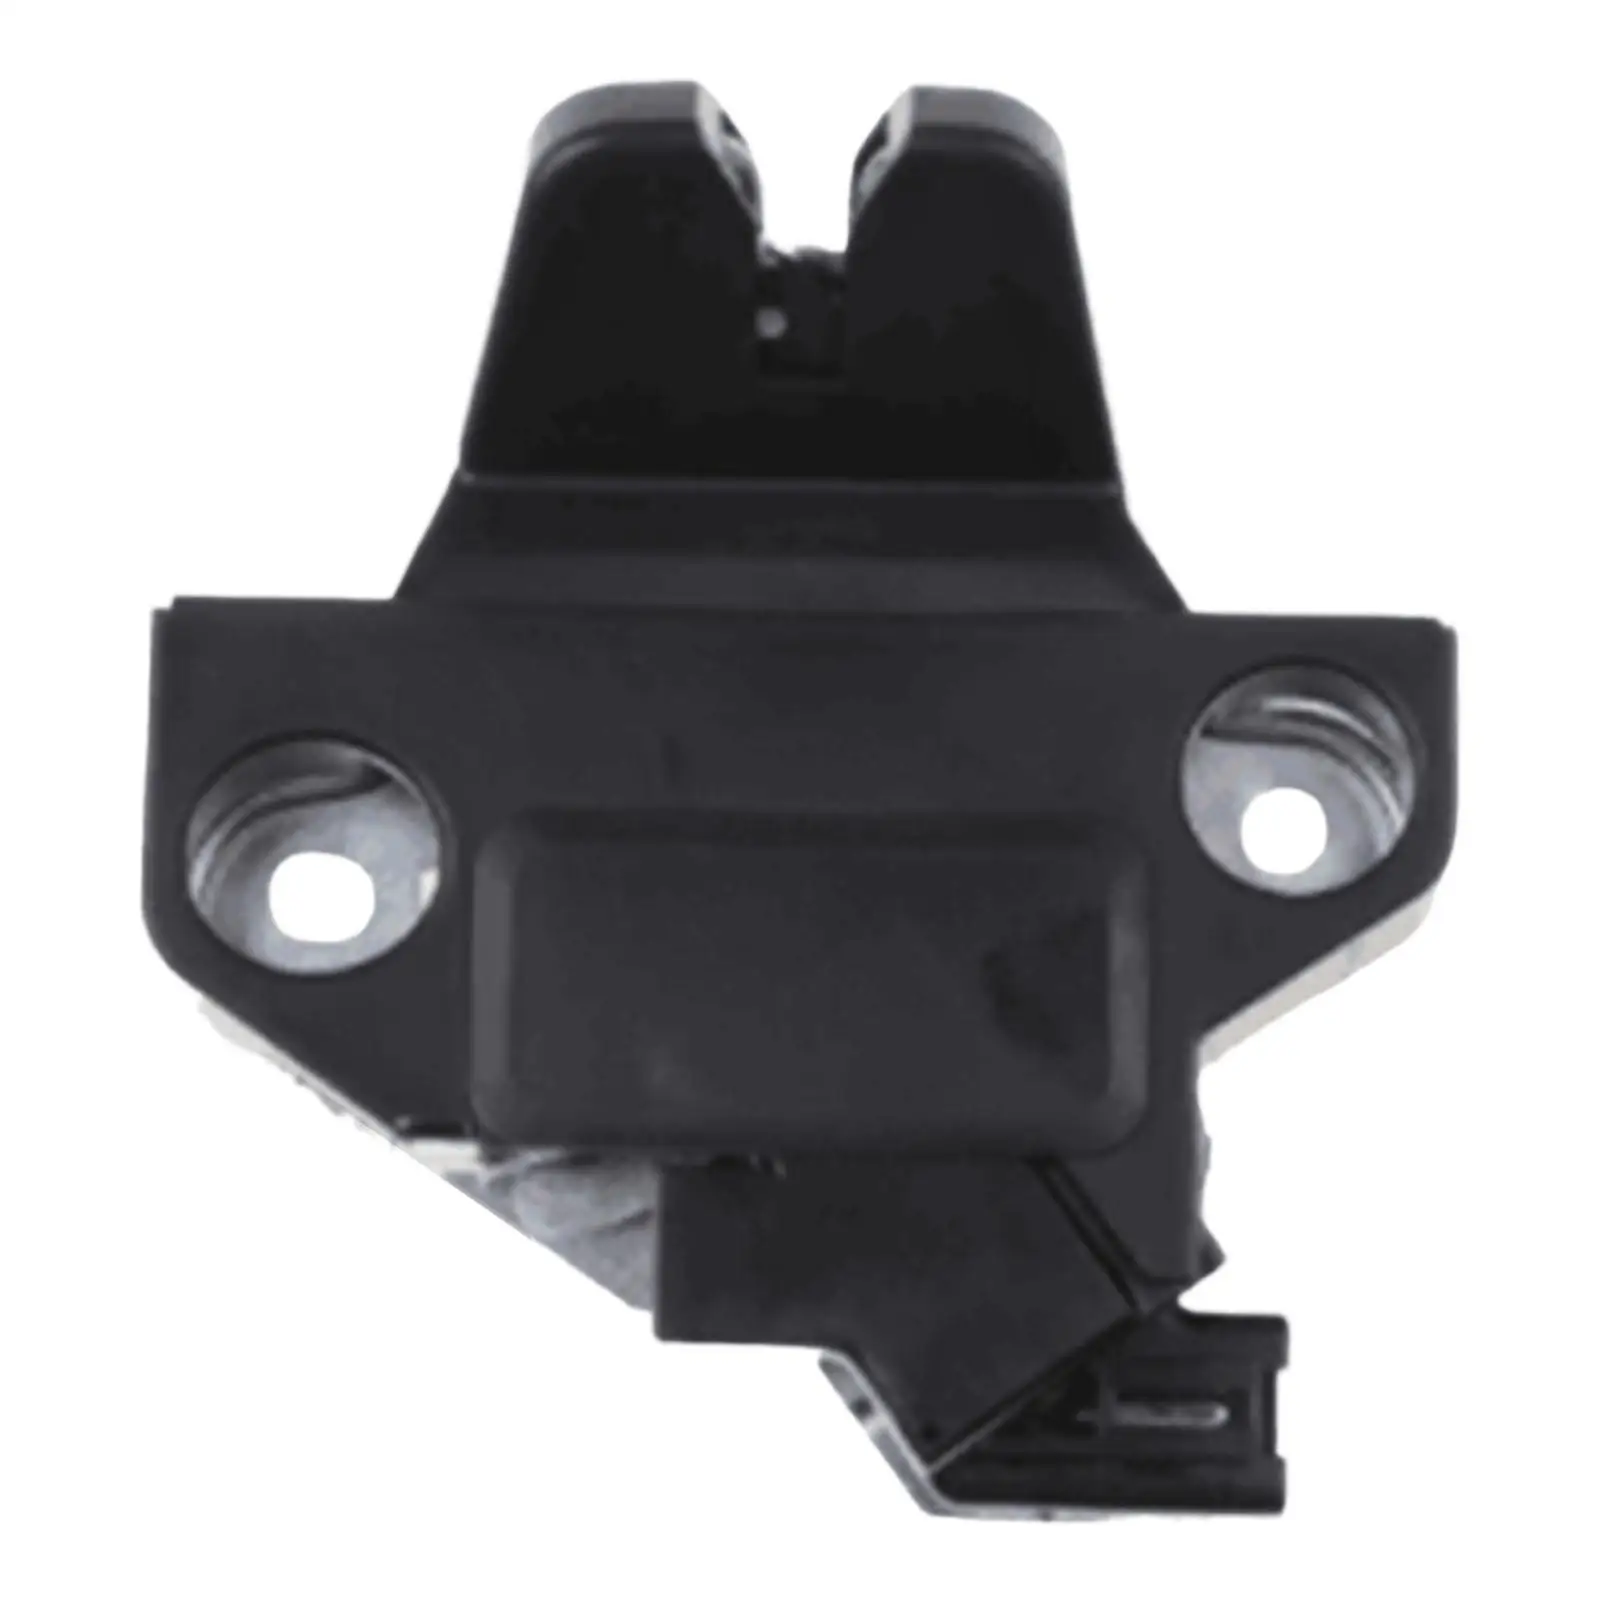 

Auto Rear Tailgate Lock 64610-02110 Trunk Boot Lid Latch 6461002110 Car for Corolla Easy Install Durable Replacement